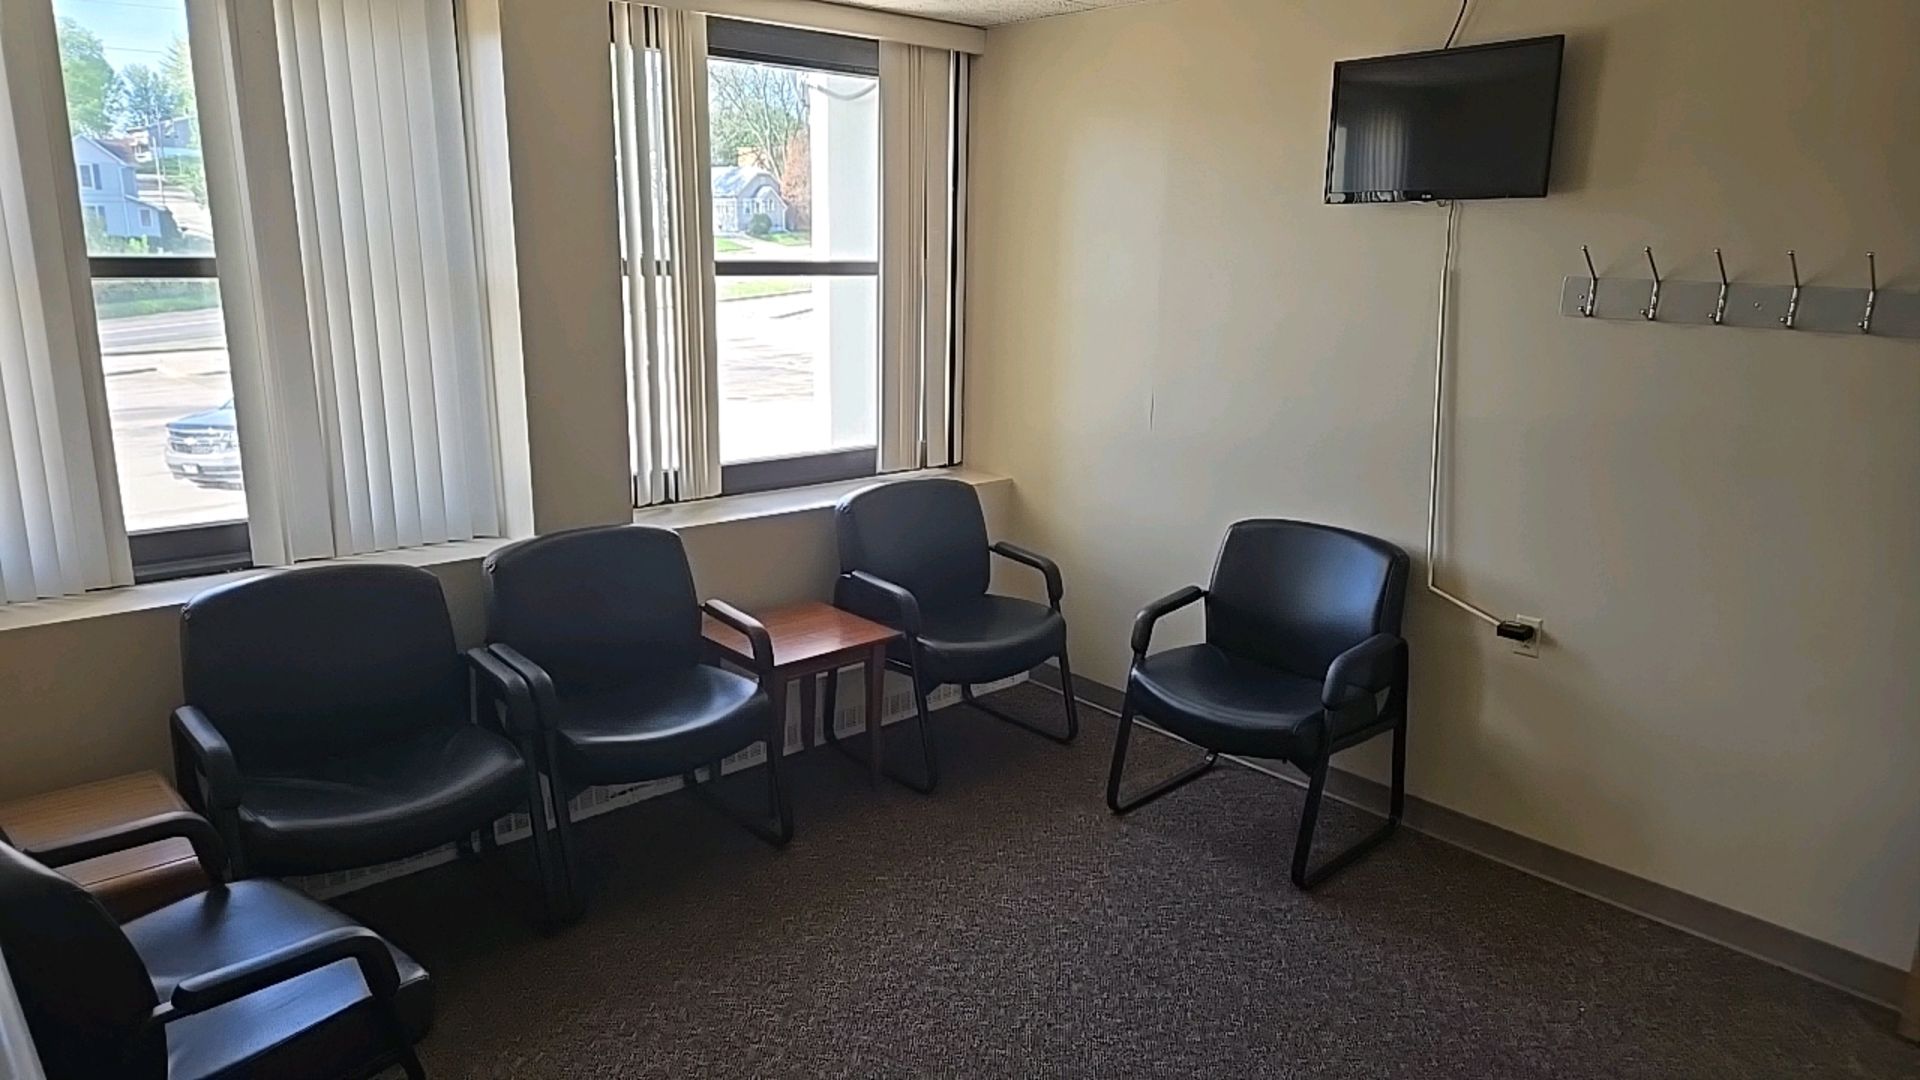 WAITING ROOM TO INCLUDE: CHAIRS, LG FLATSCREEN TELEVISON, END TABLES, WALL MOUNT COAT RACK